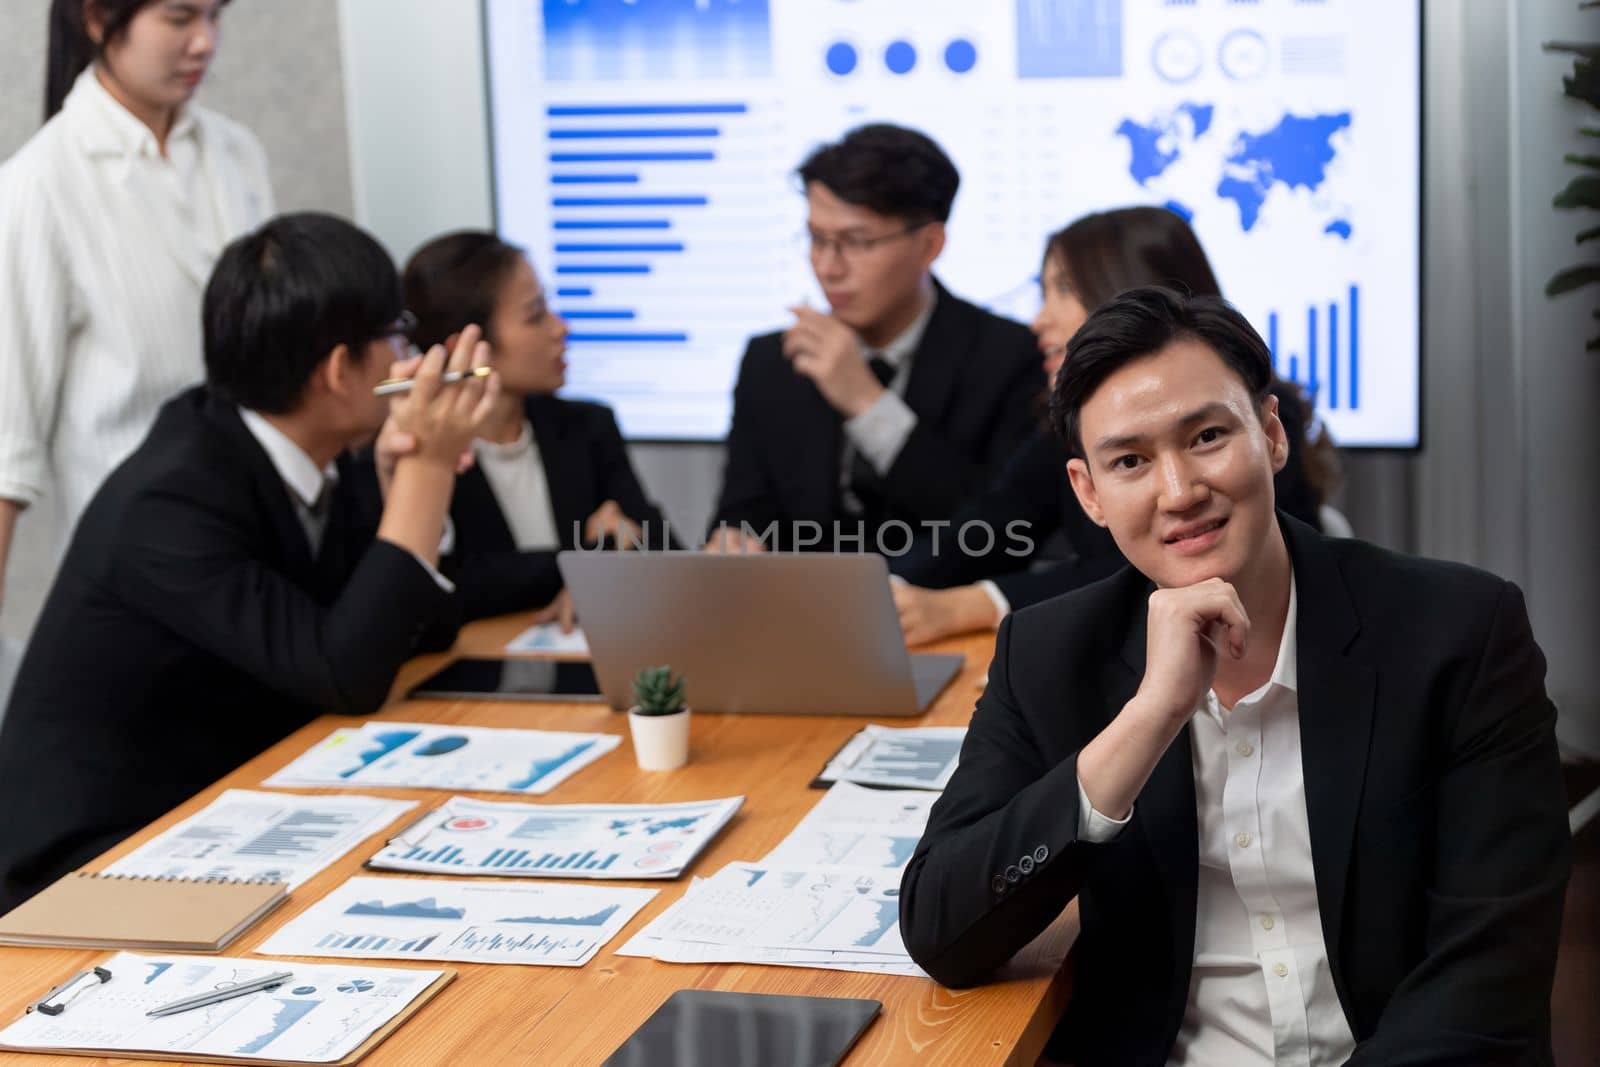 Focus portrait male manager in harmony office with businesspeople in background. by biancoblue